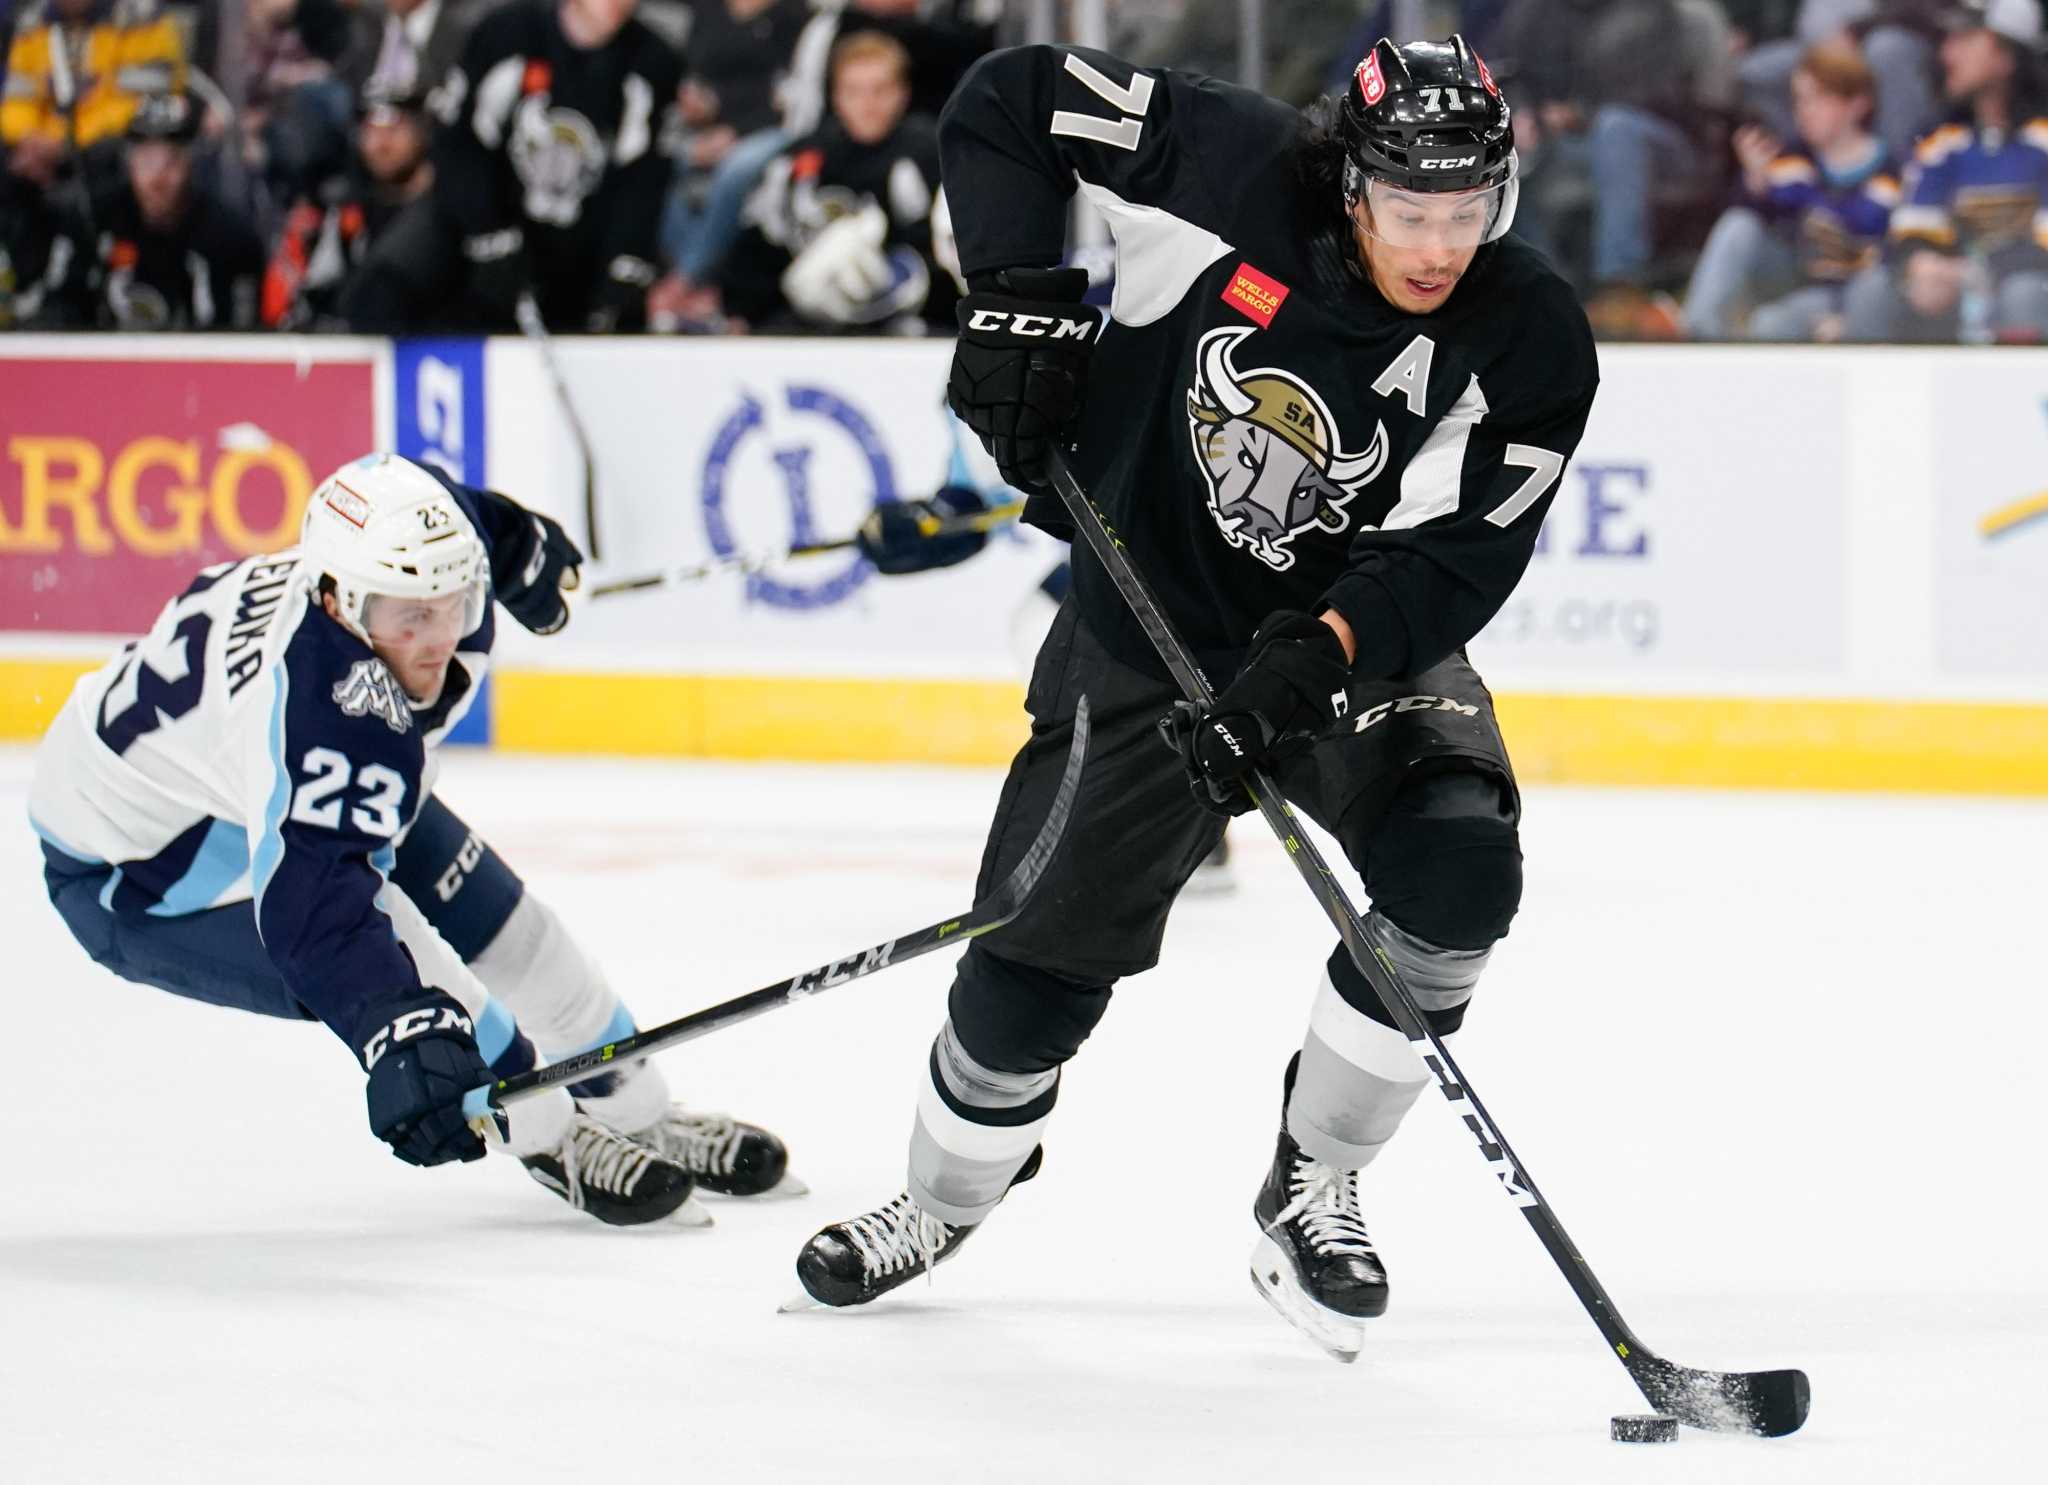 San Antonio Rampage force overtime before losing to Milwaukee Admirals